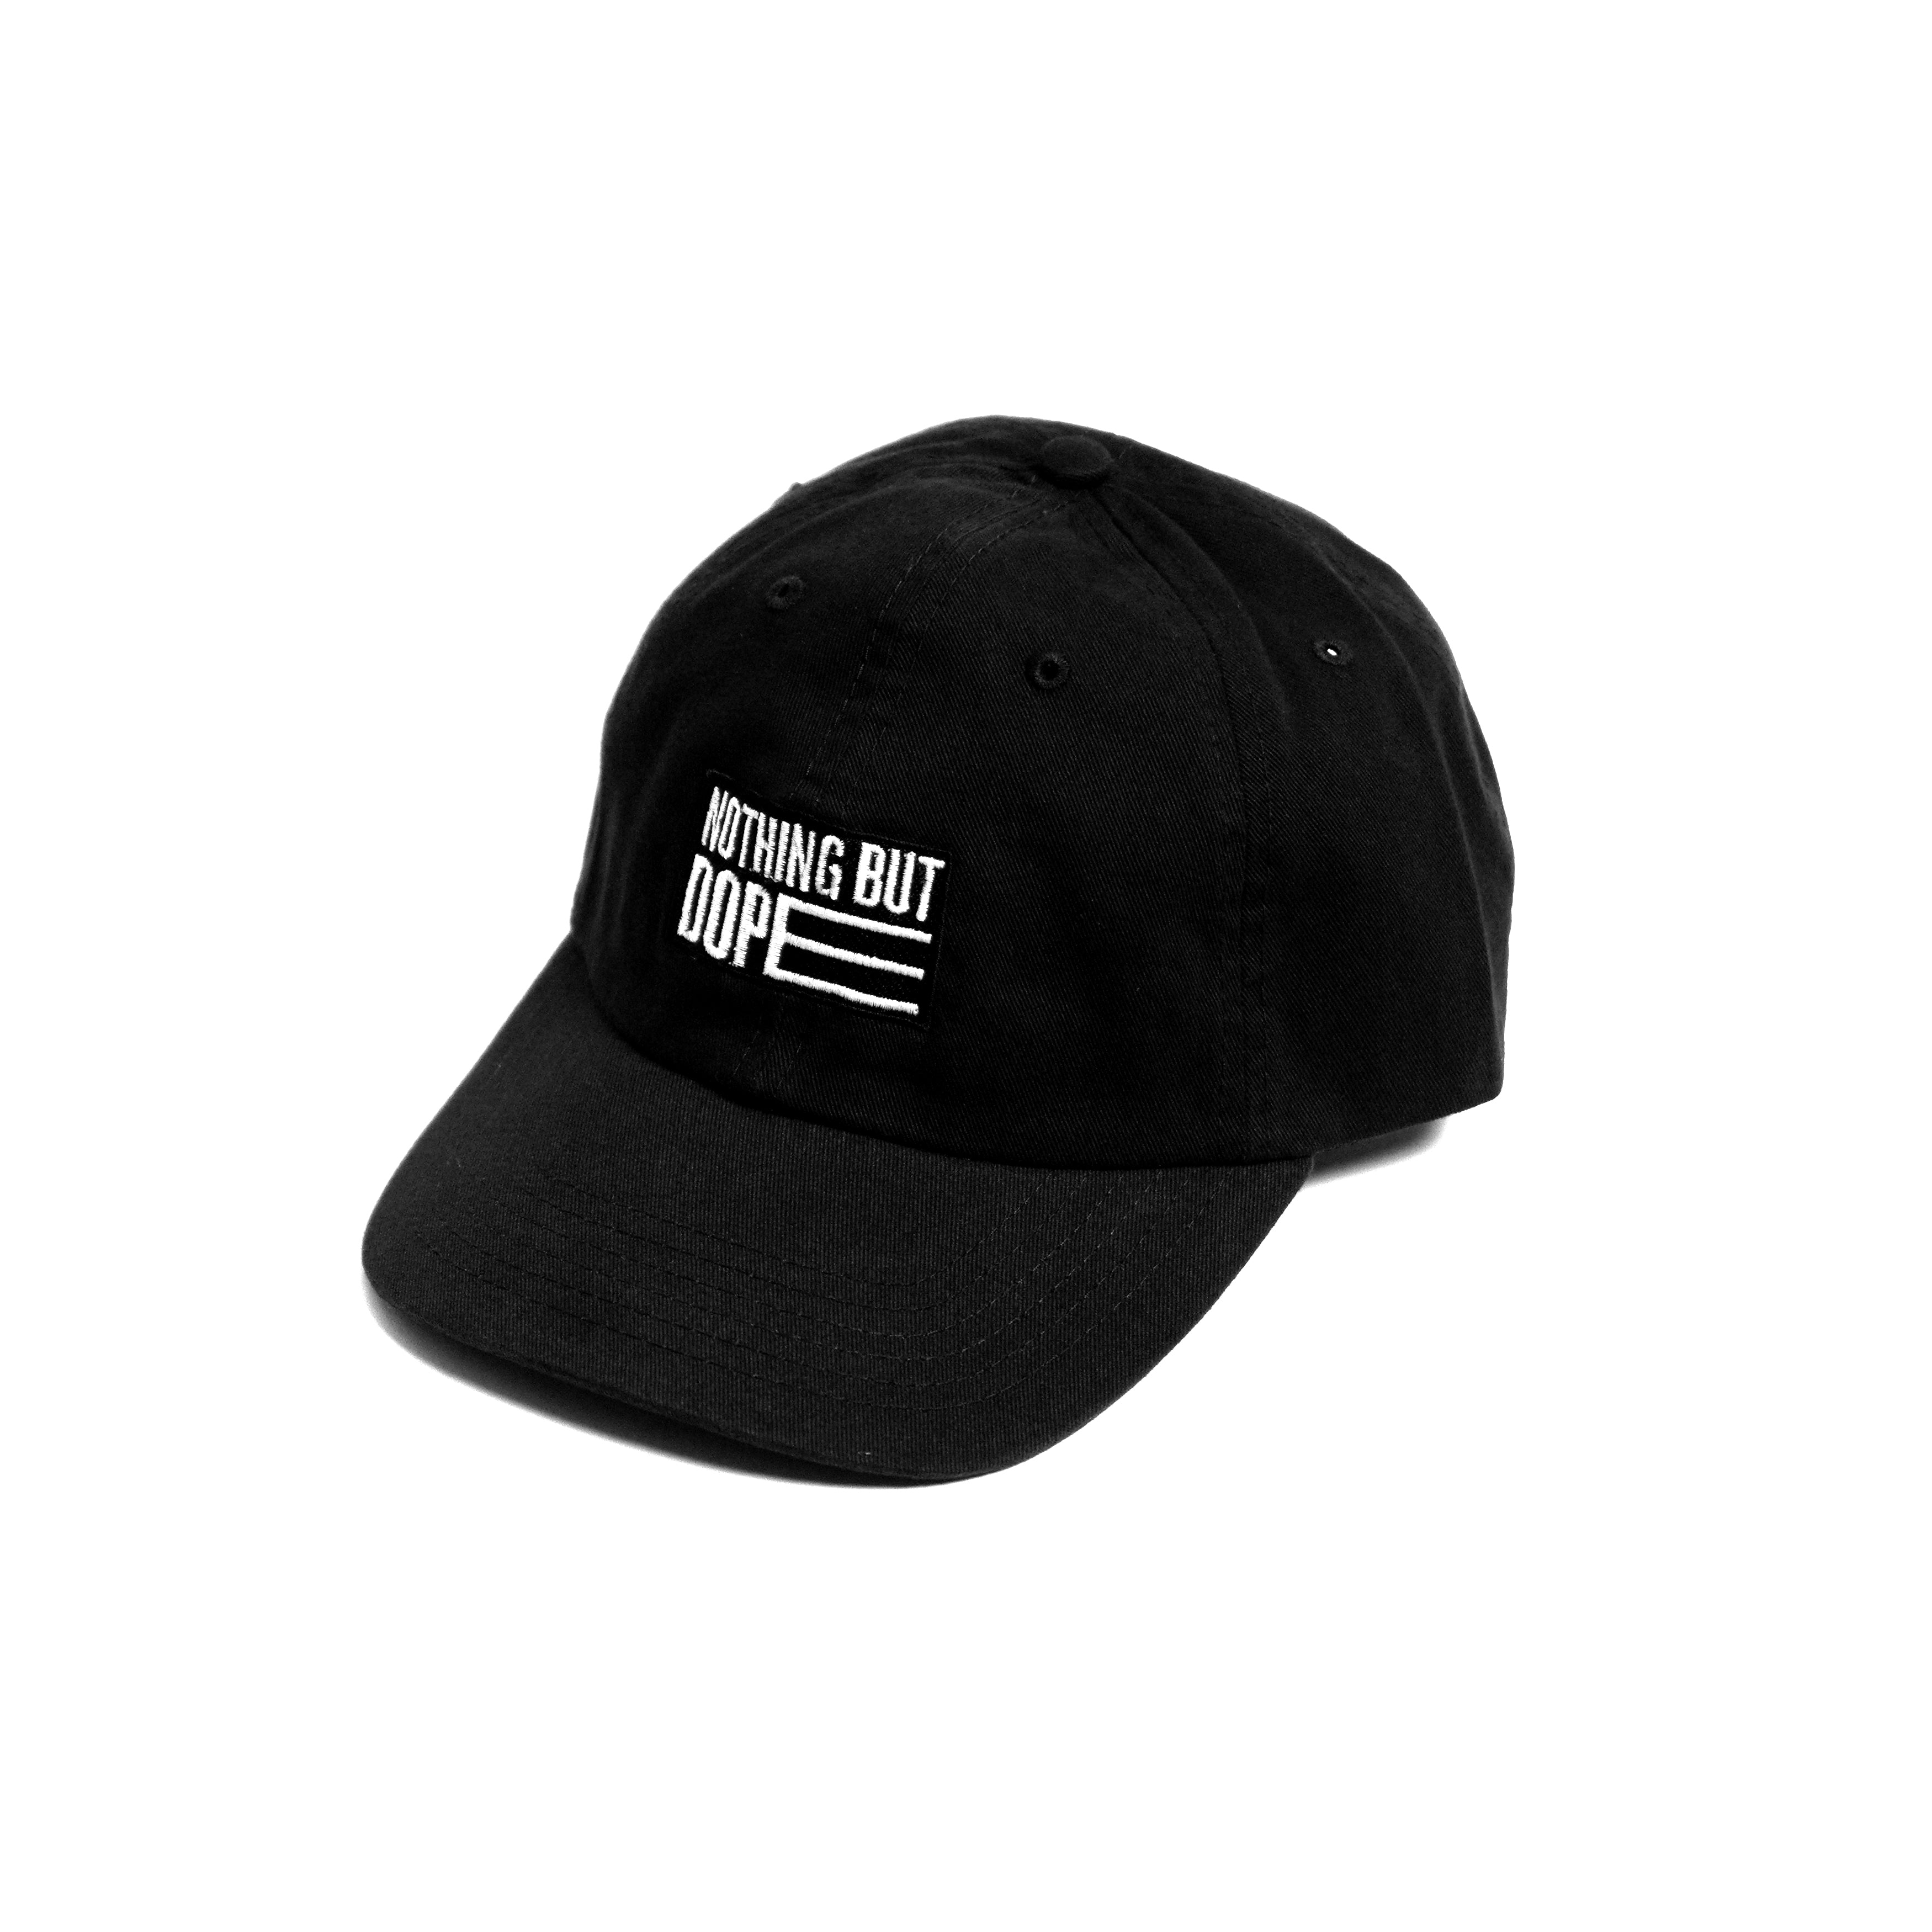 Nothing But Dope® Dad Hat